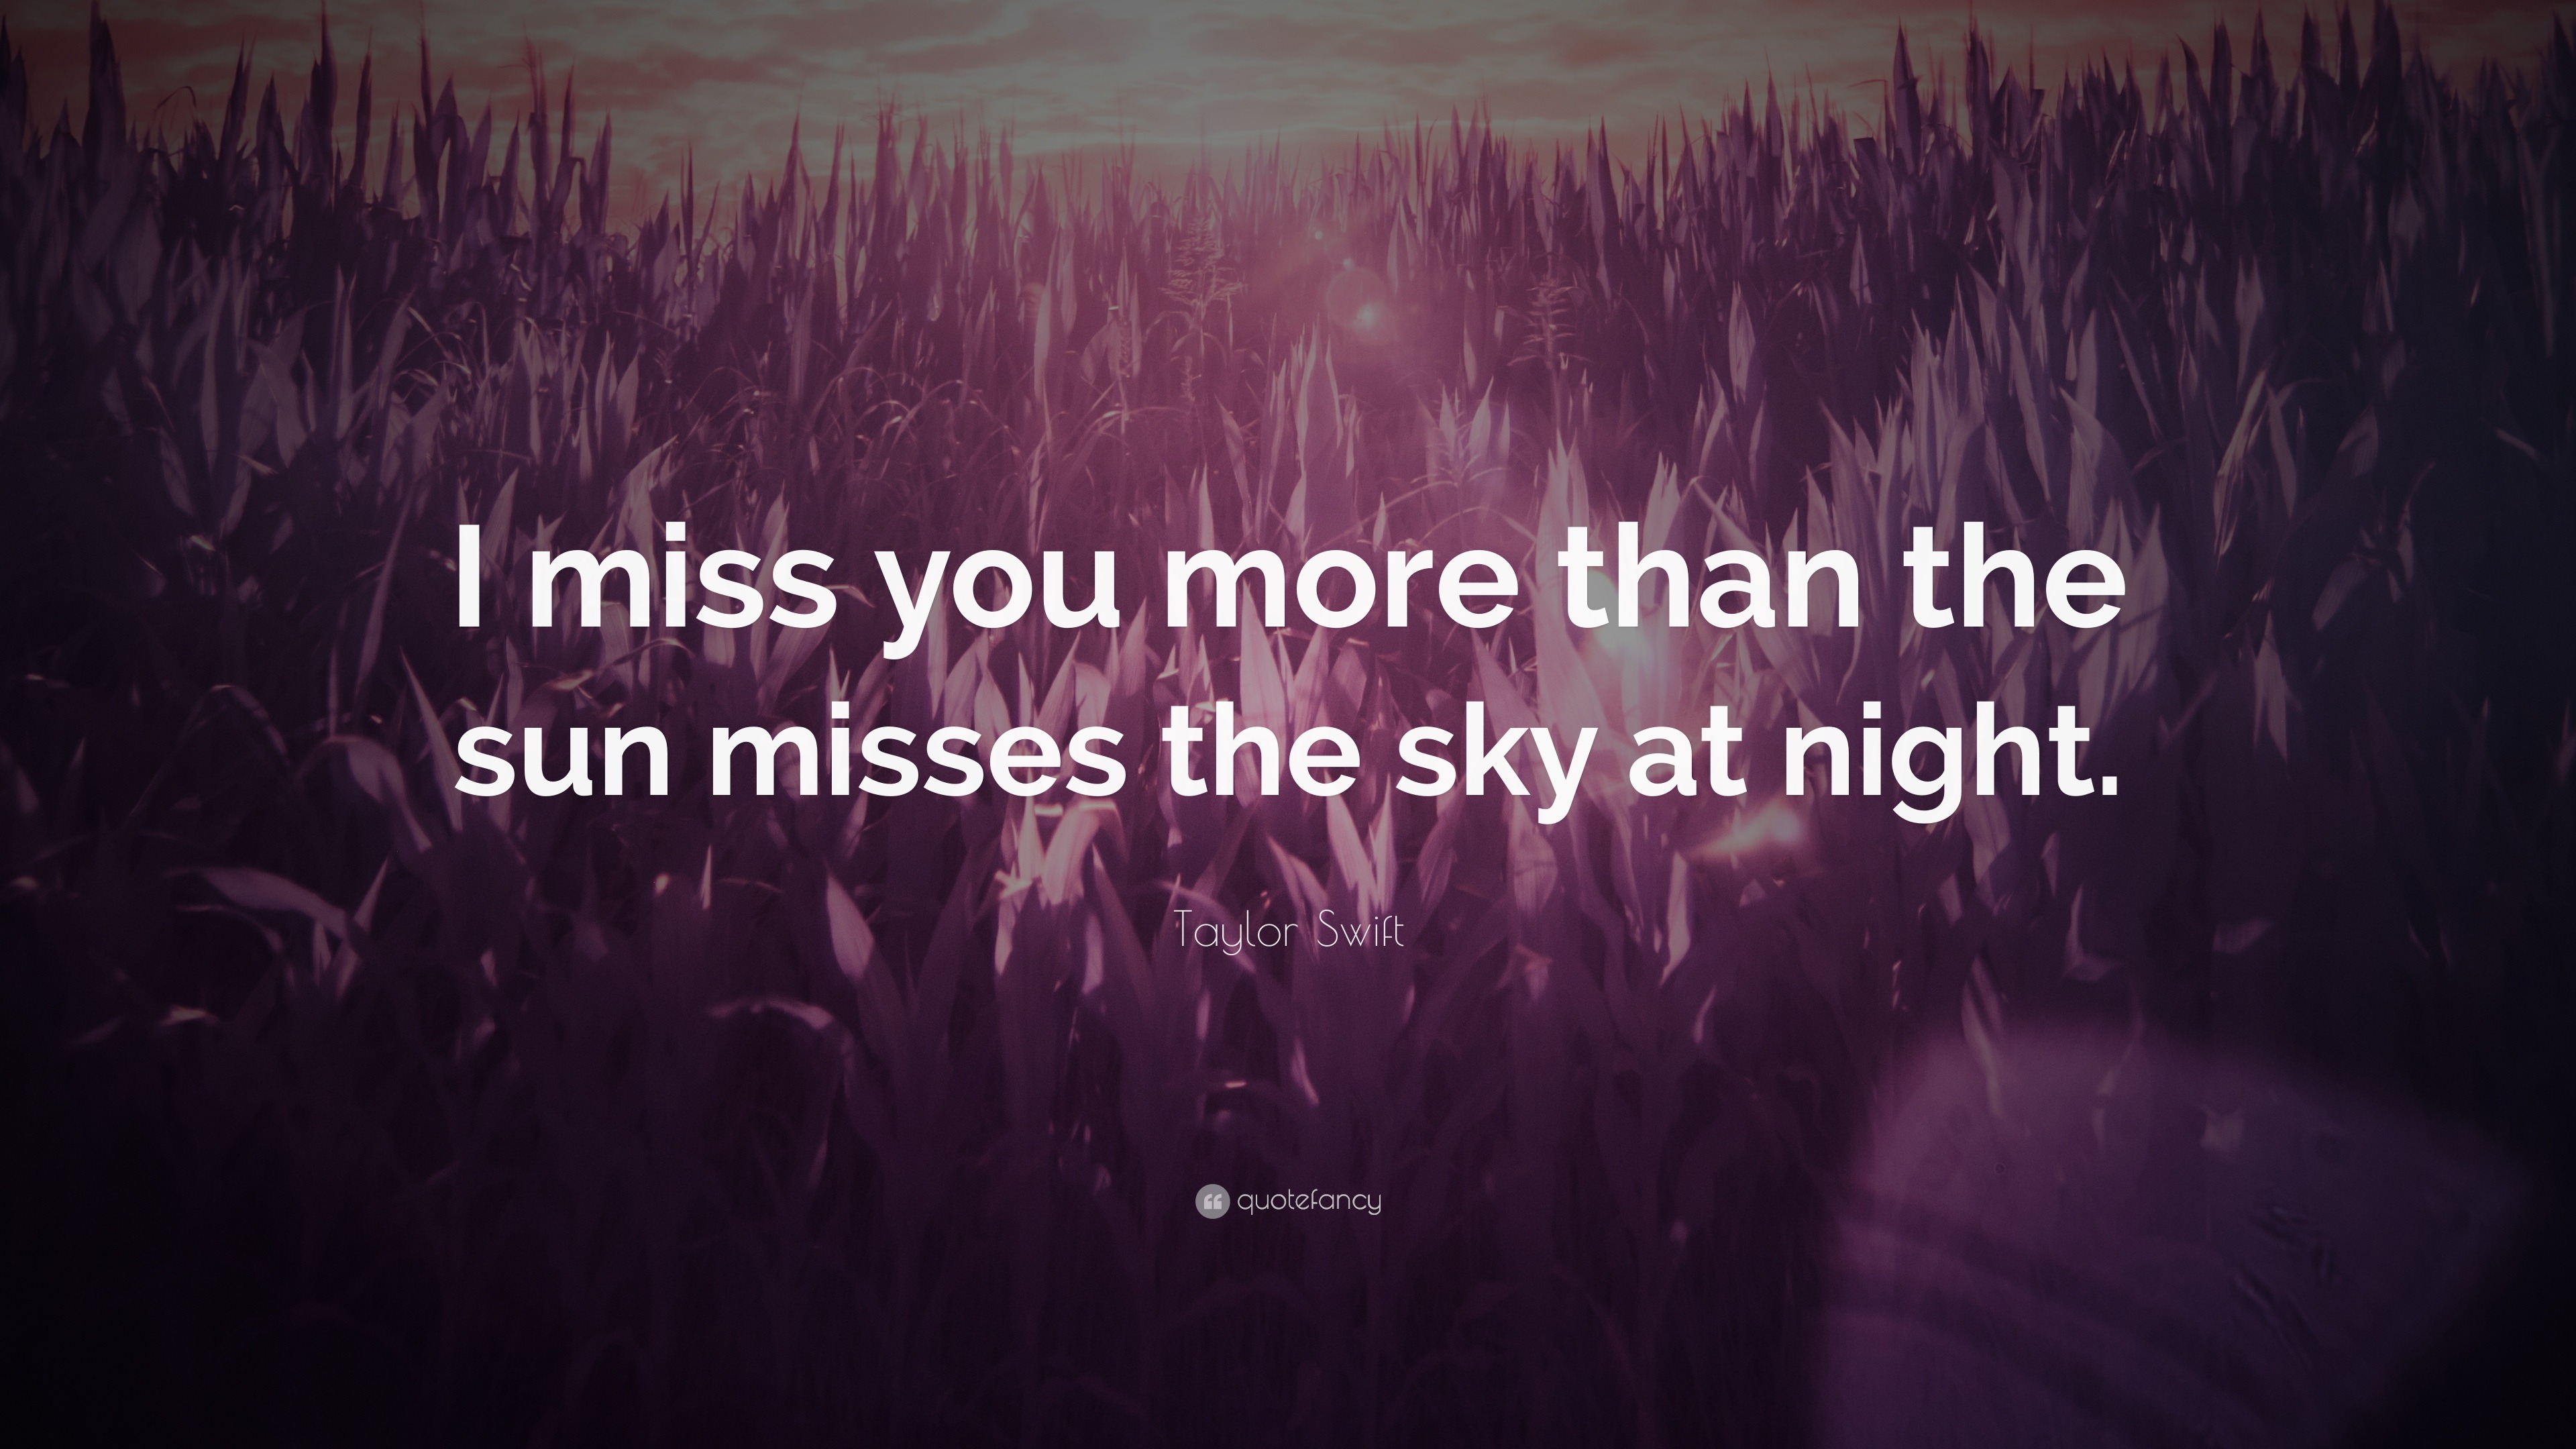 Taylor Swift Quote: “I miss you more than the sun misses ...